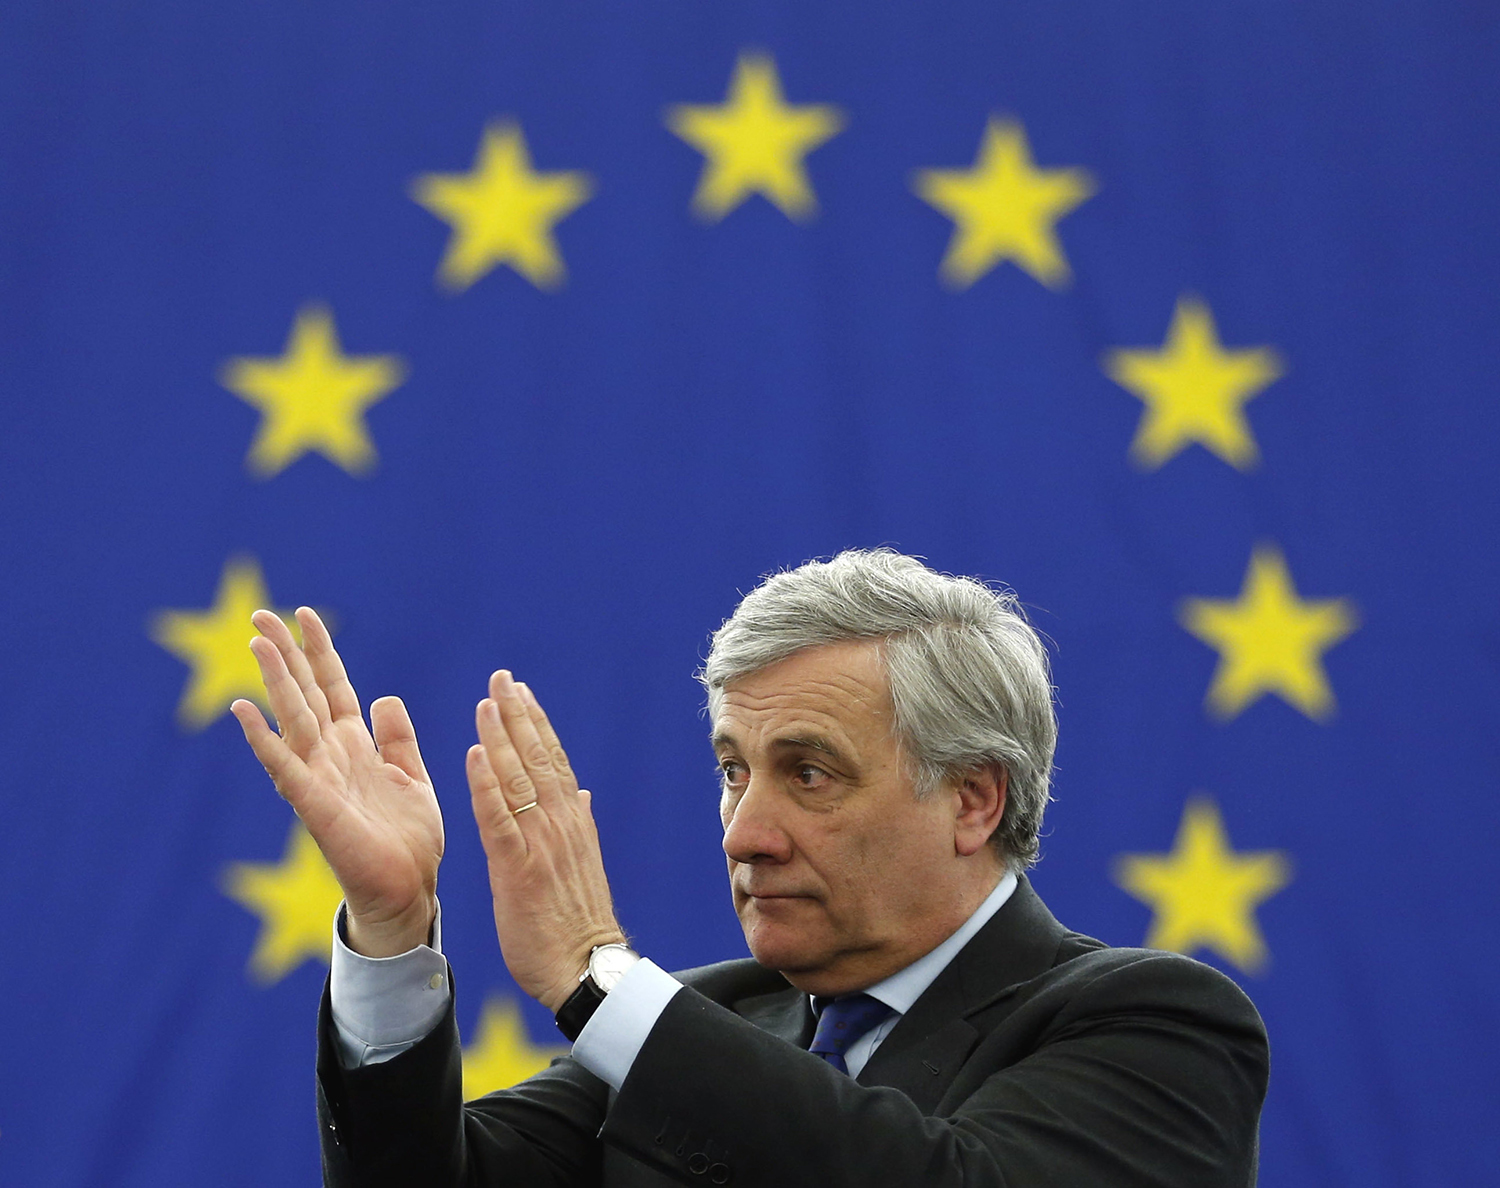 Antonio Tajani acknowledges applauses after being elected European Parliament President at the European Parliament in Strasbourg, in Strasbourg, eastern France, Tuesday, Jan. 17, 2017. Antonio Tajani of the EPP Christian Democrat group was elected president of the European Parliament on Tuesday in a daylong polling series during which he defeated his socialist opponent. (AP Photo/Jean-Francois Badias)